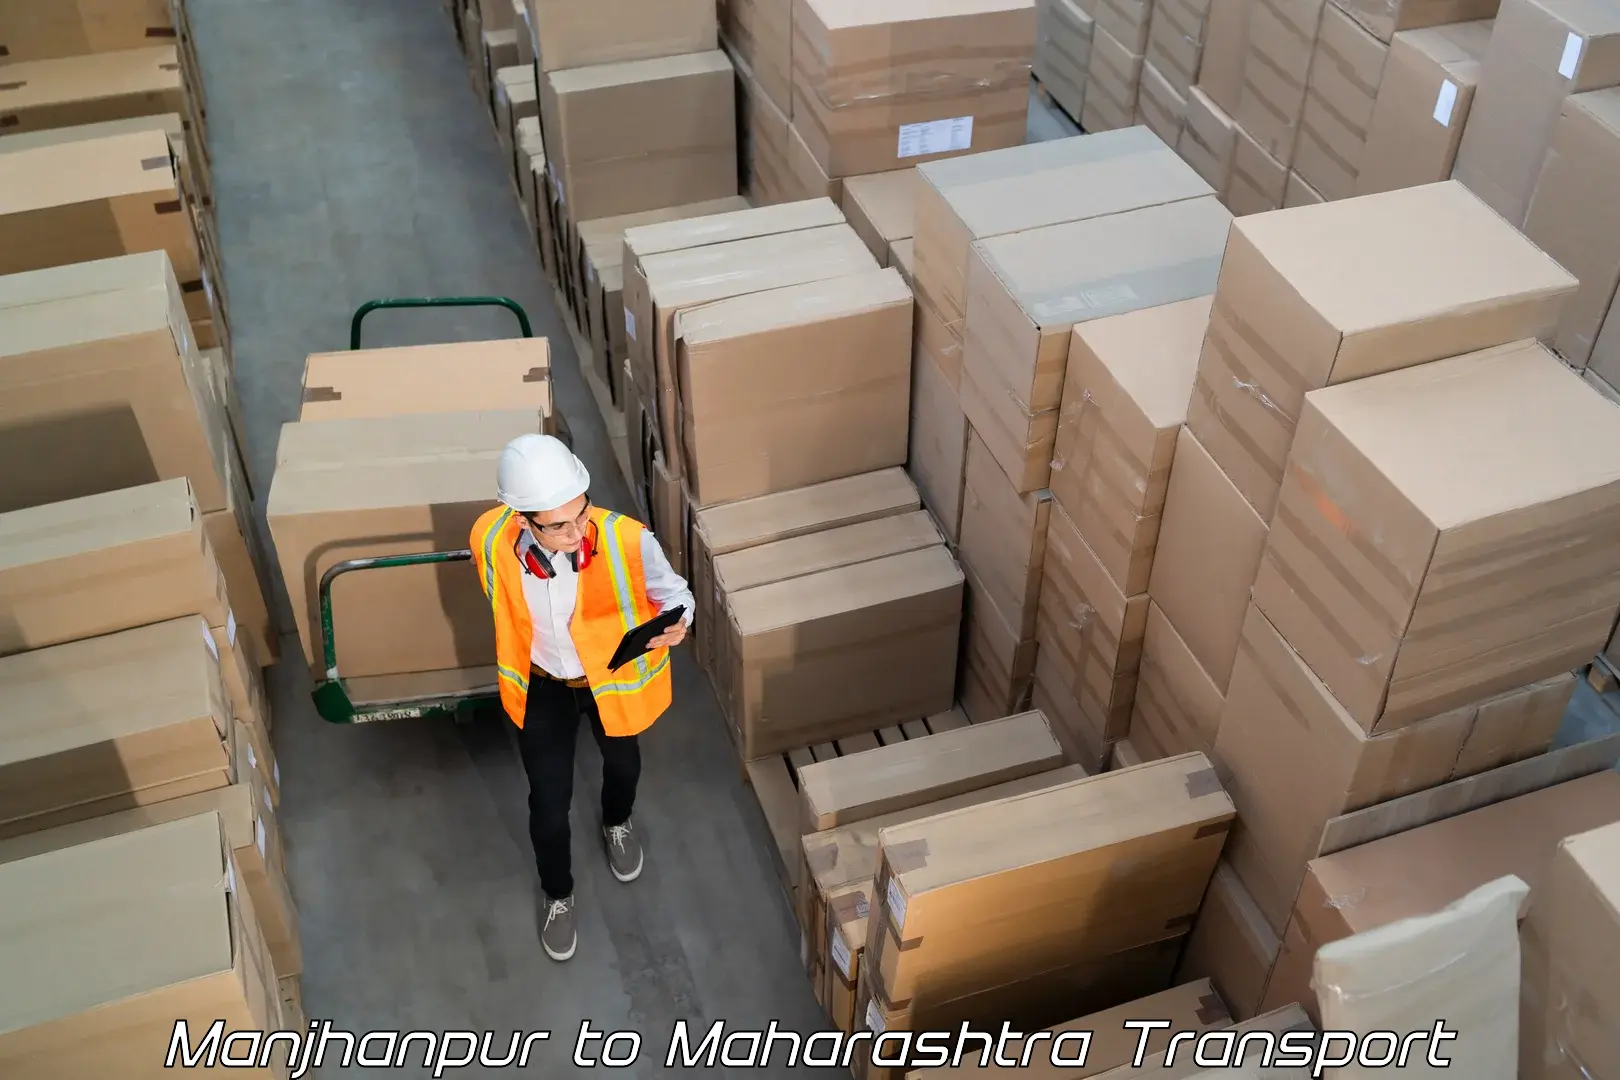 Air freight transport services Manjhanpur to Chakan